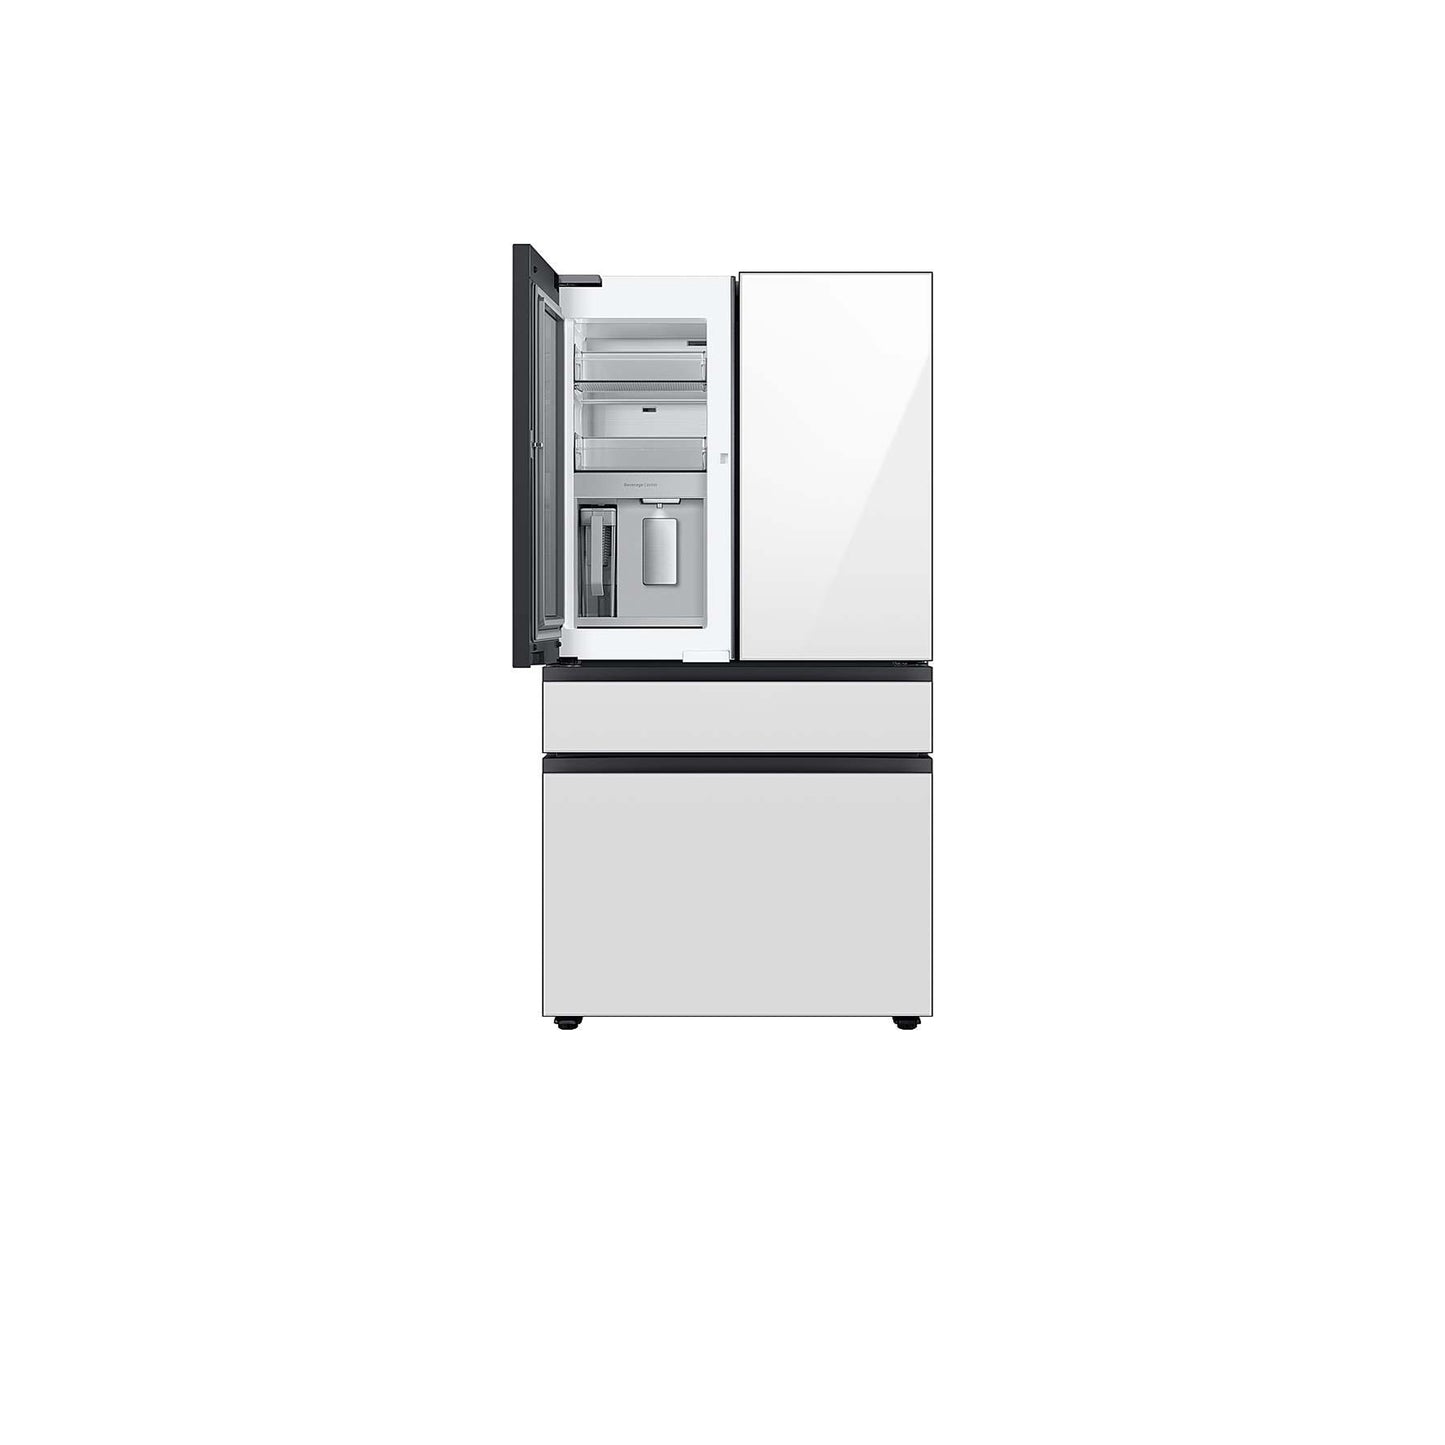 Bespoke 4-Door French Door Refrigerator (23 cu. ft.) with Customizable Door Panel Colors and Beverage Center™ in Emerald Green Steel Top, White Glass Middle, and Clementine Glass Bottom Panels.